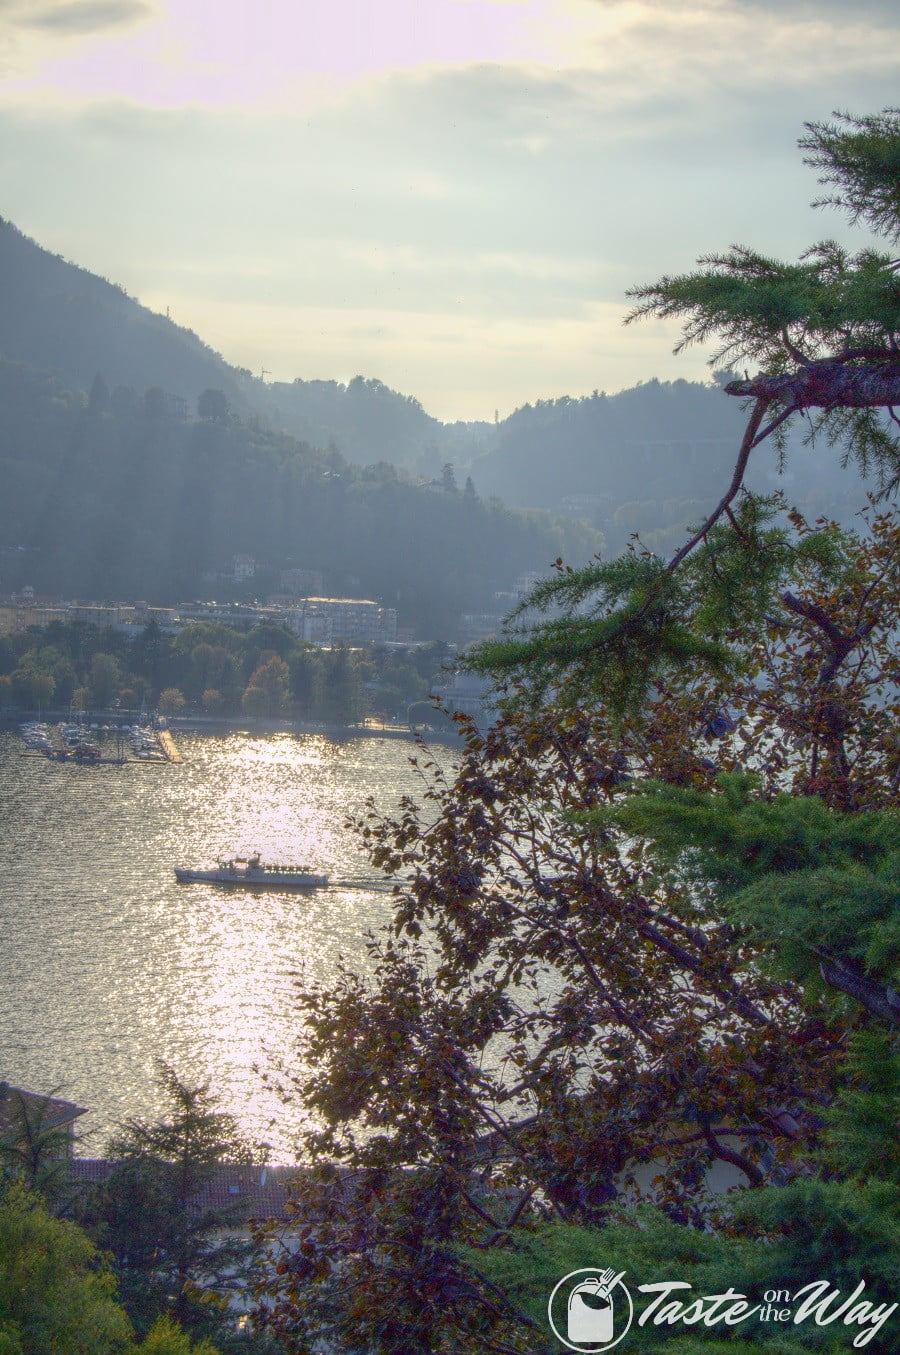 Check out 15+ amazing #views of Lake Como, #Italy! #travel #photography @tasteontheway